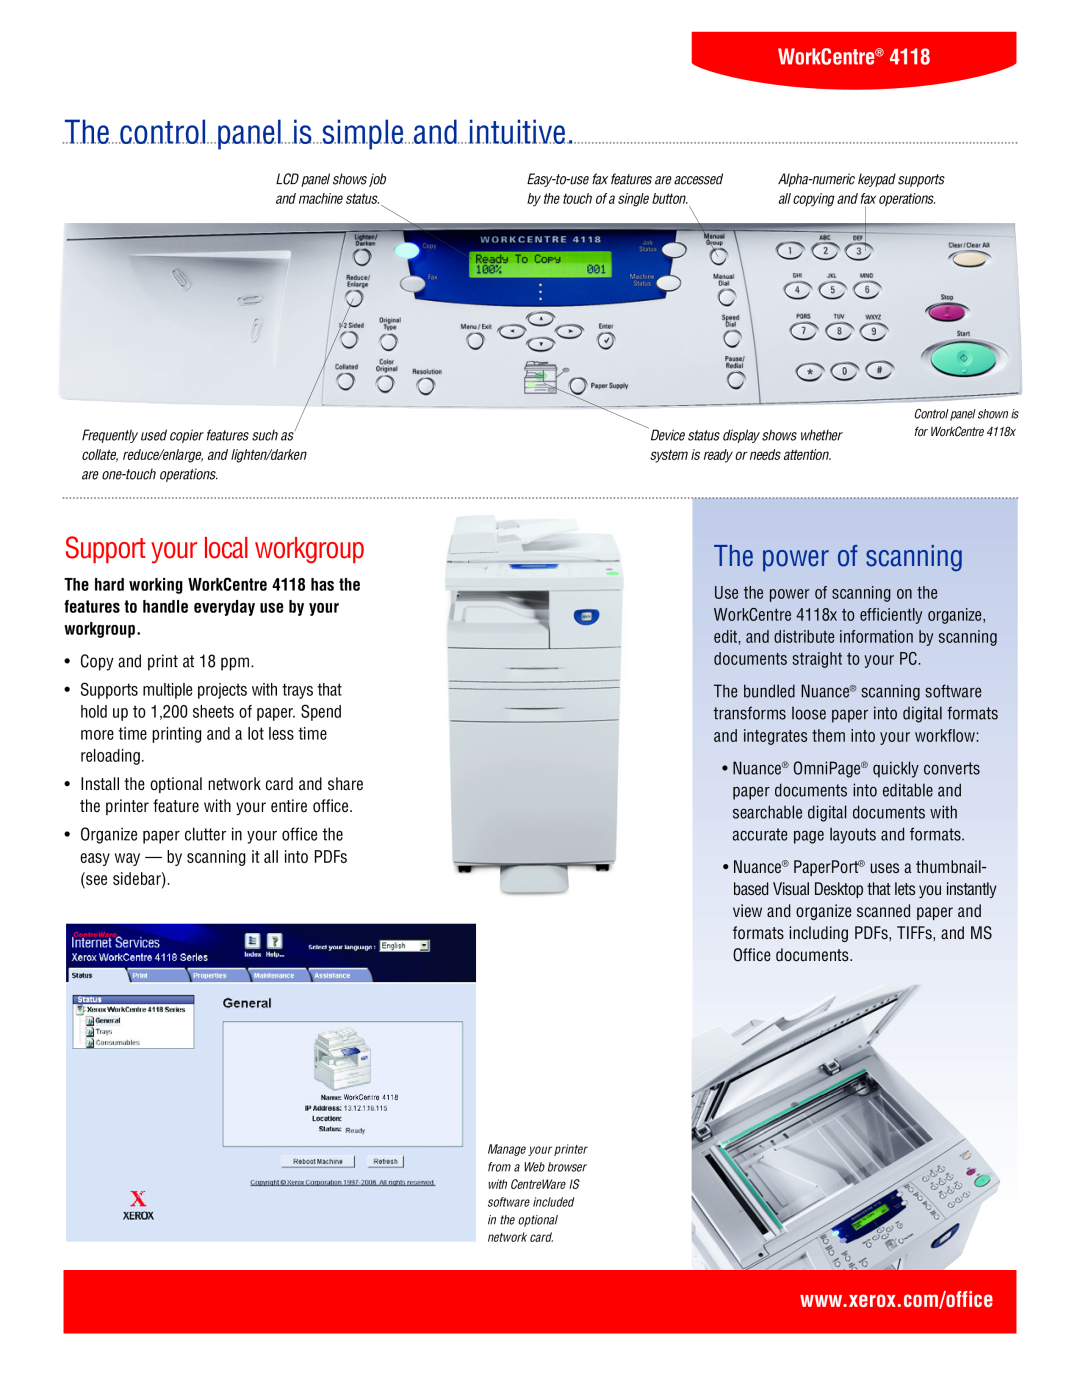 Xerox 4118 The control panel is simple and intuitive, Support your local workgroup, The power of scanning, WorkCentre 